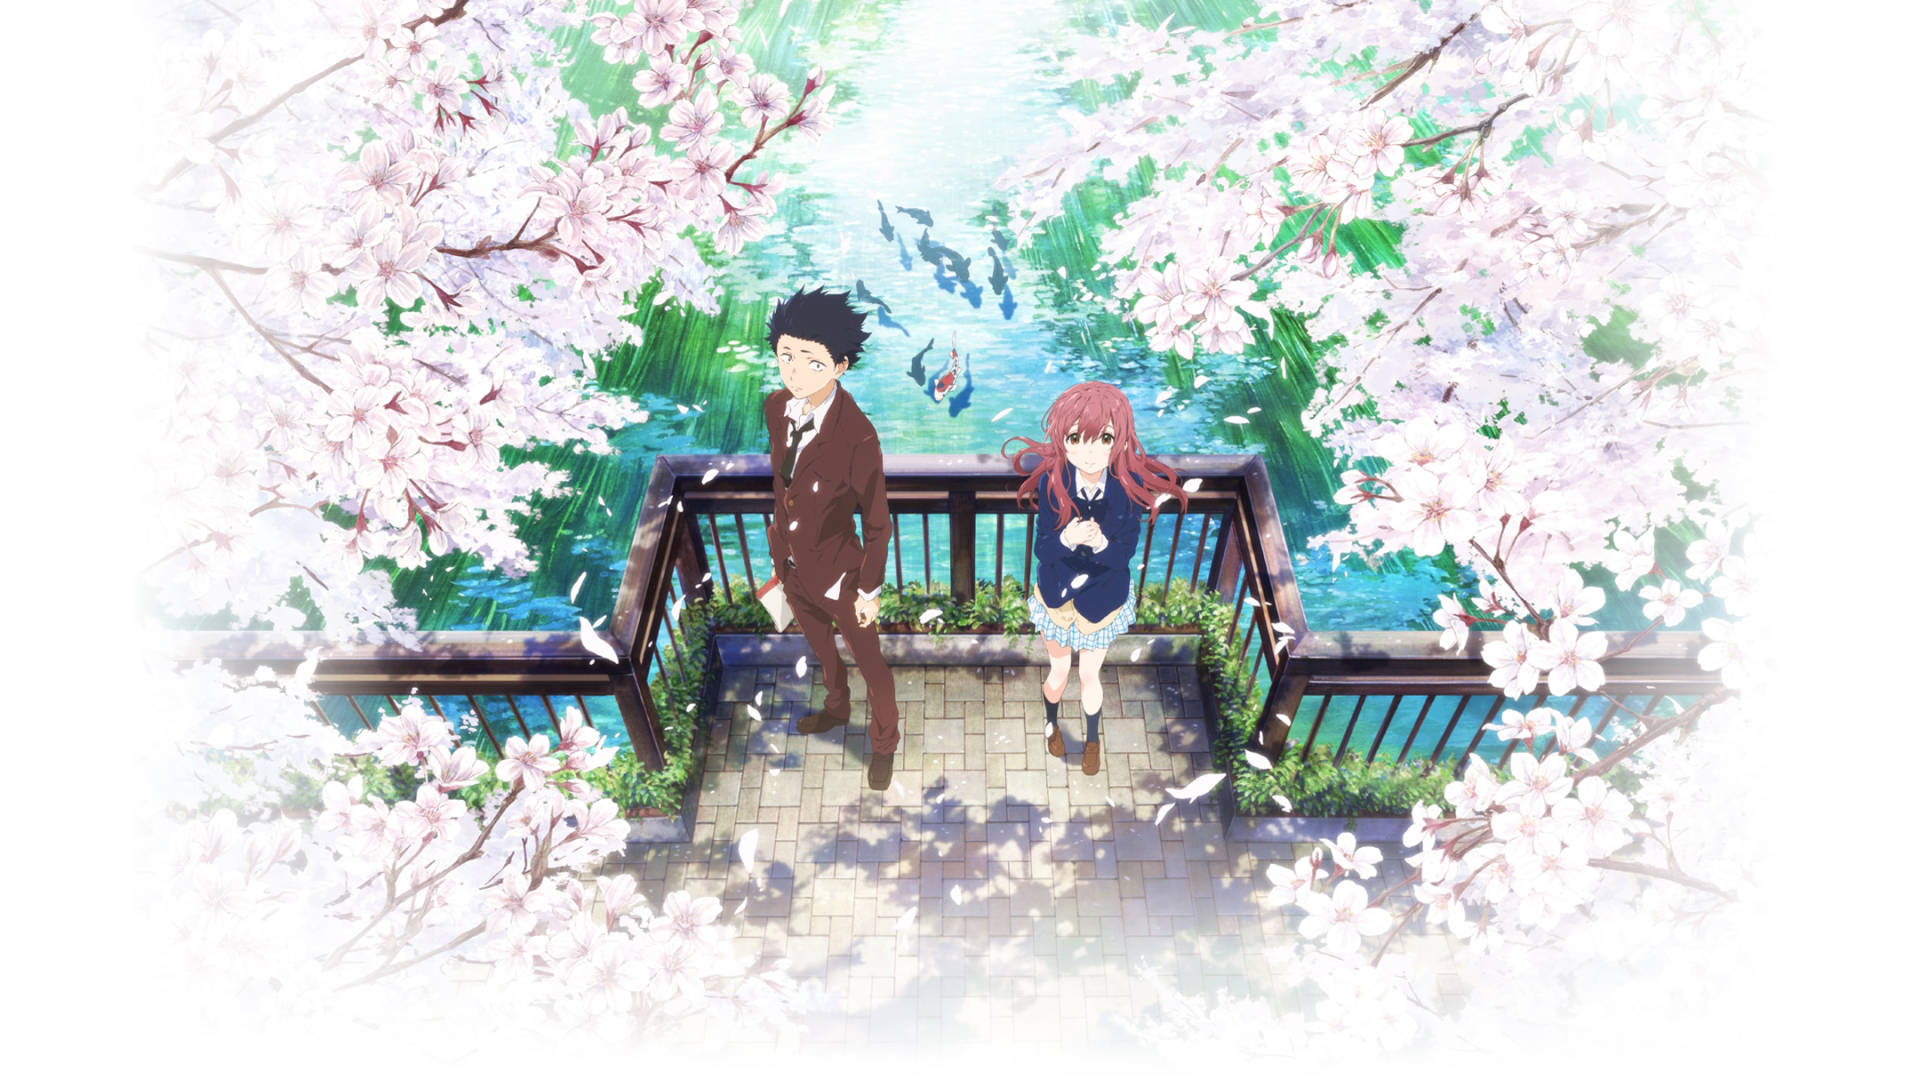 A couple feeling the warmth of their relationship under a beautiful cherry blossom tree Wallpaper